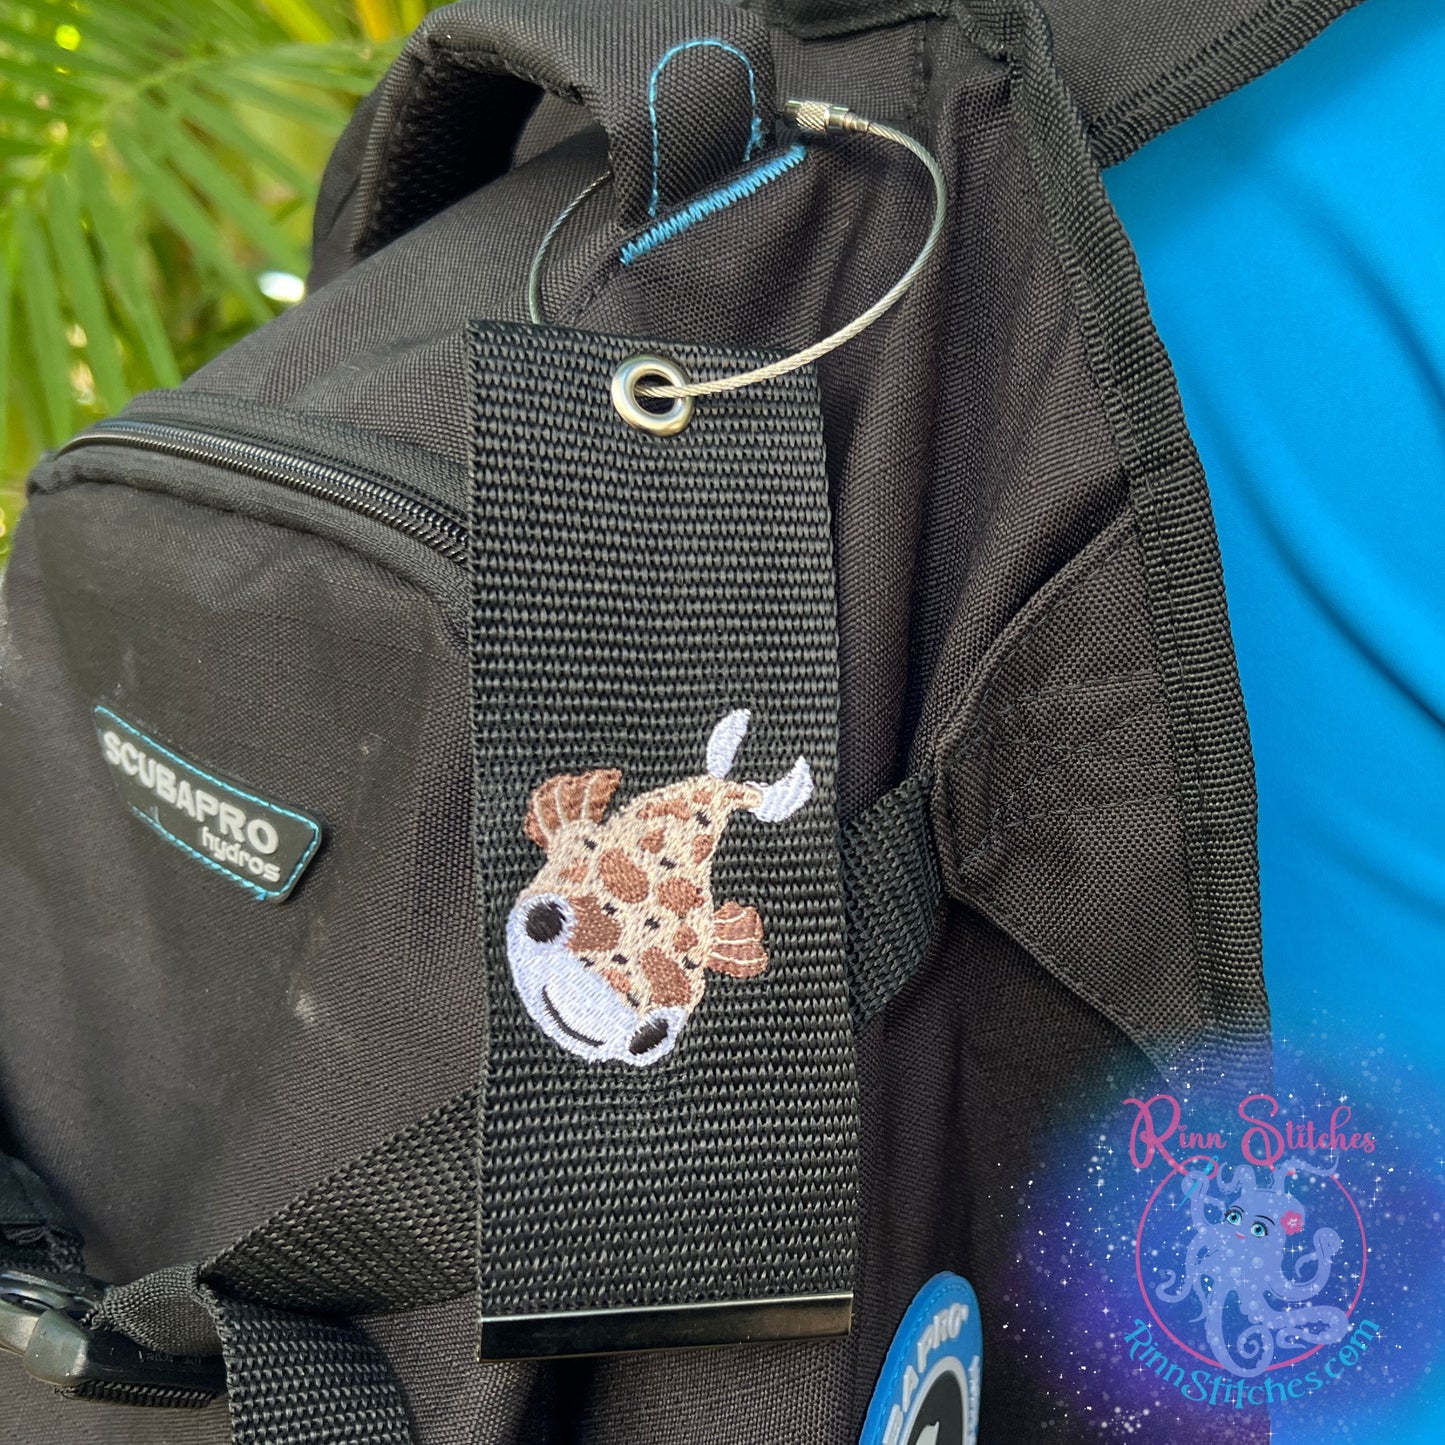 Puffer Fish (Porcupine Fish) Luggage Tag, Personalized Embroidered Bag Tag for all your Travel needs by Rinn Stitches on Maui, Hawaii